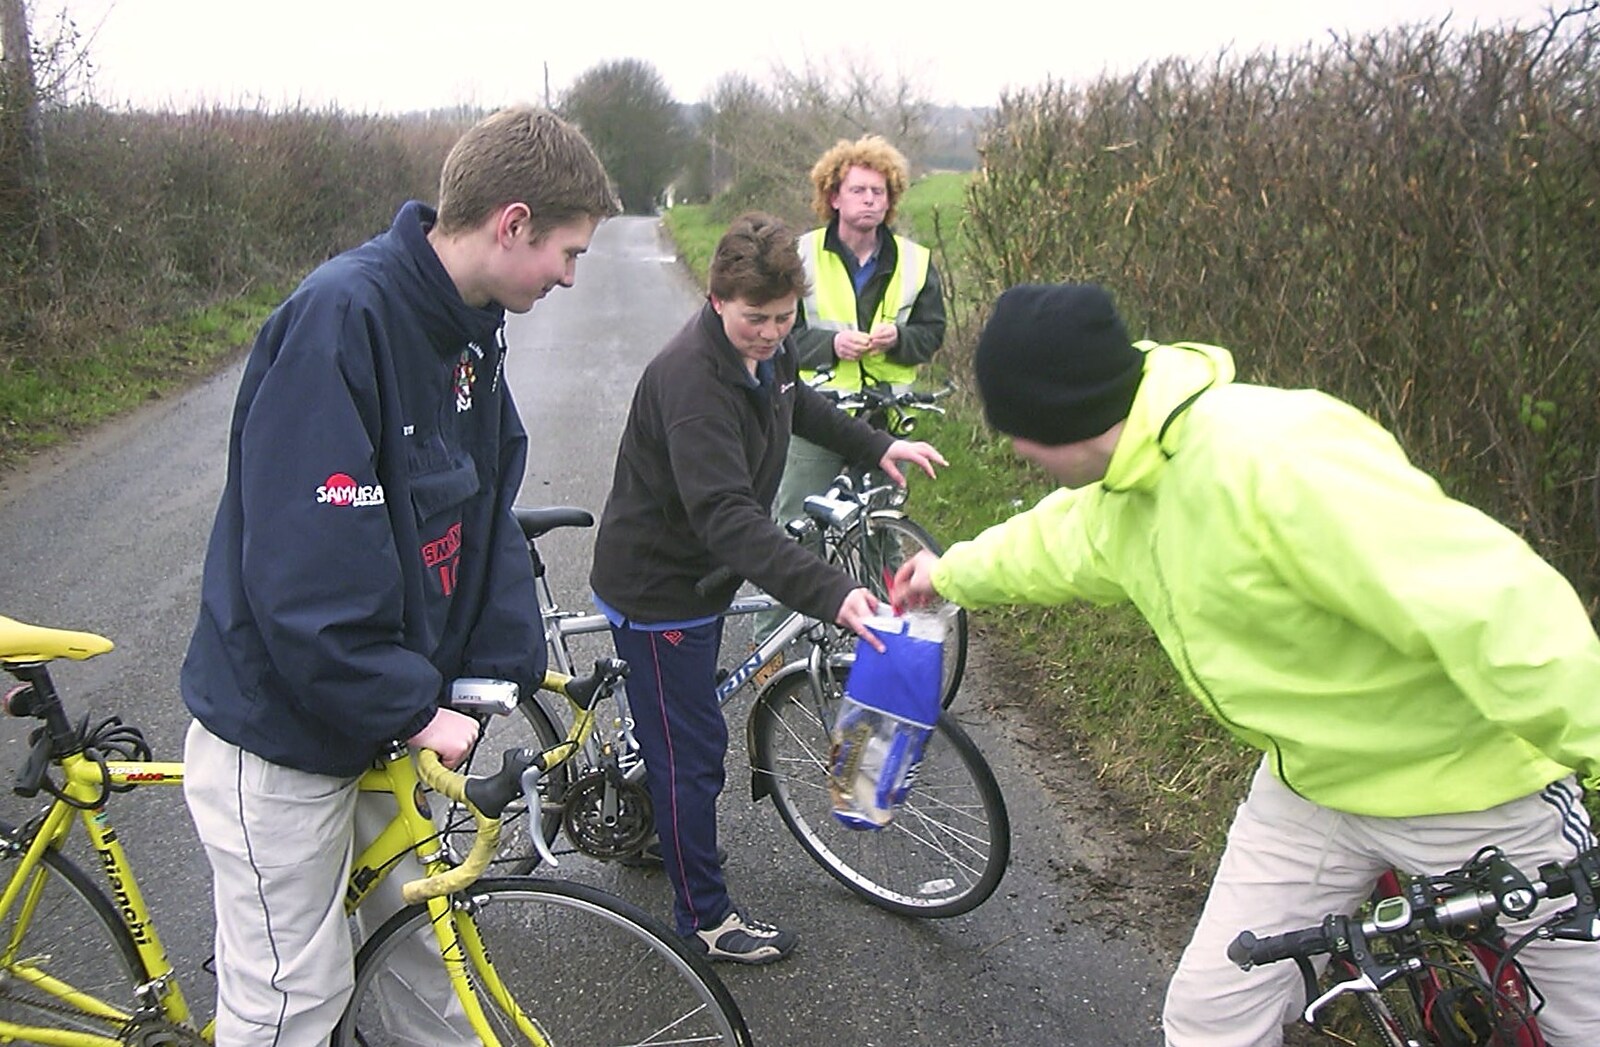 The BSCC's Evil Valentine's Day Bike Ride, Harleston, Norfolk - 14th February 2004: Bill bags another bar